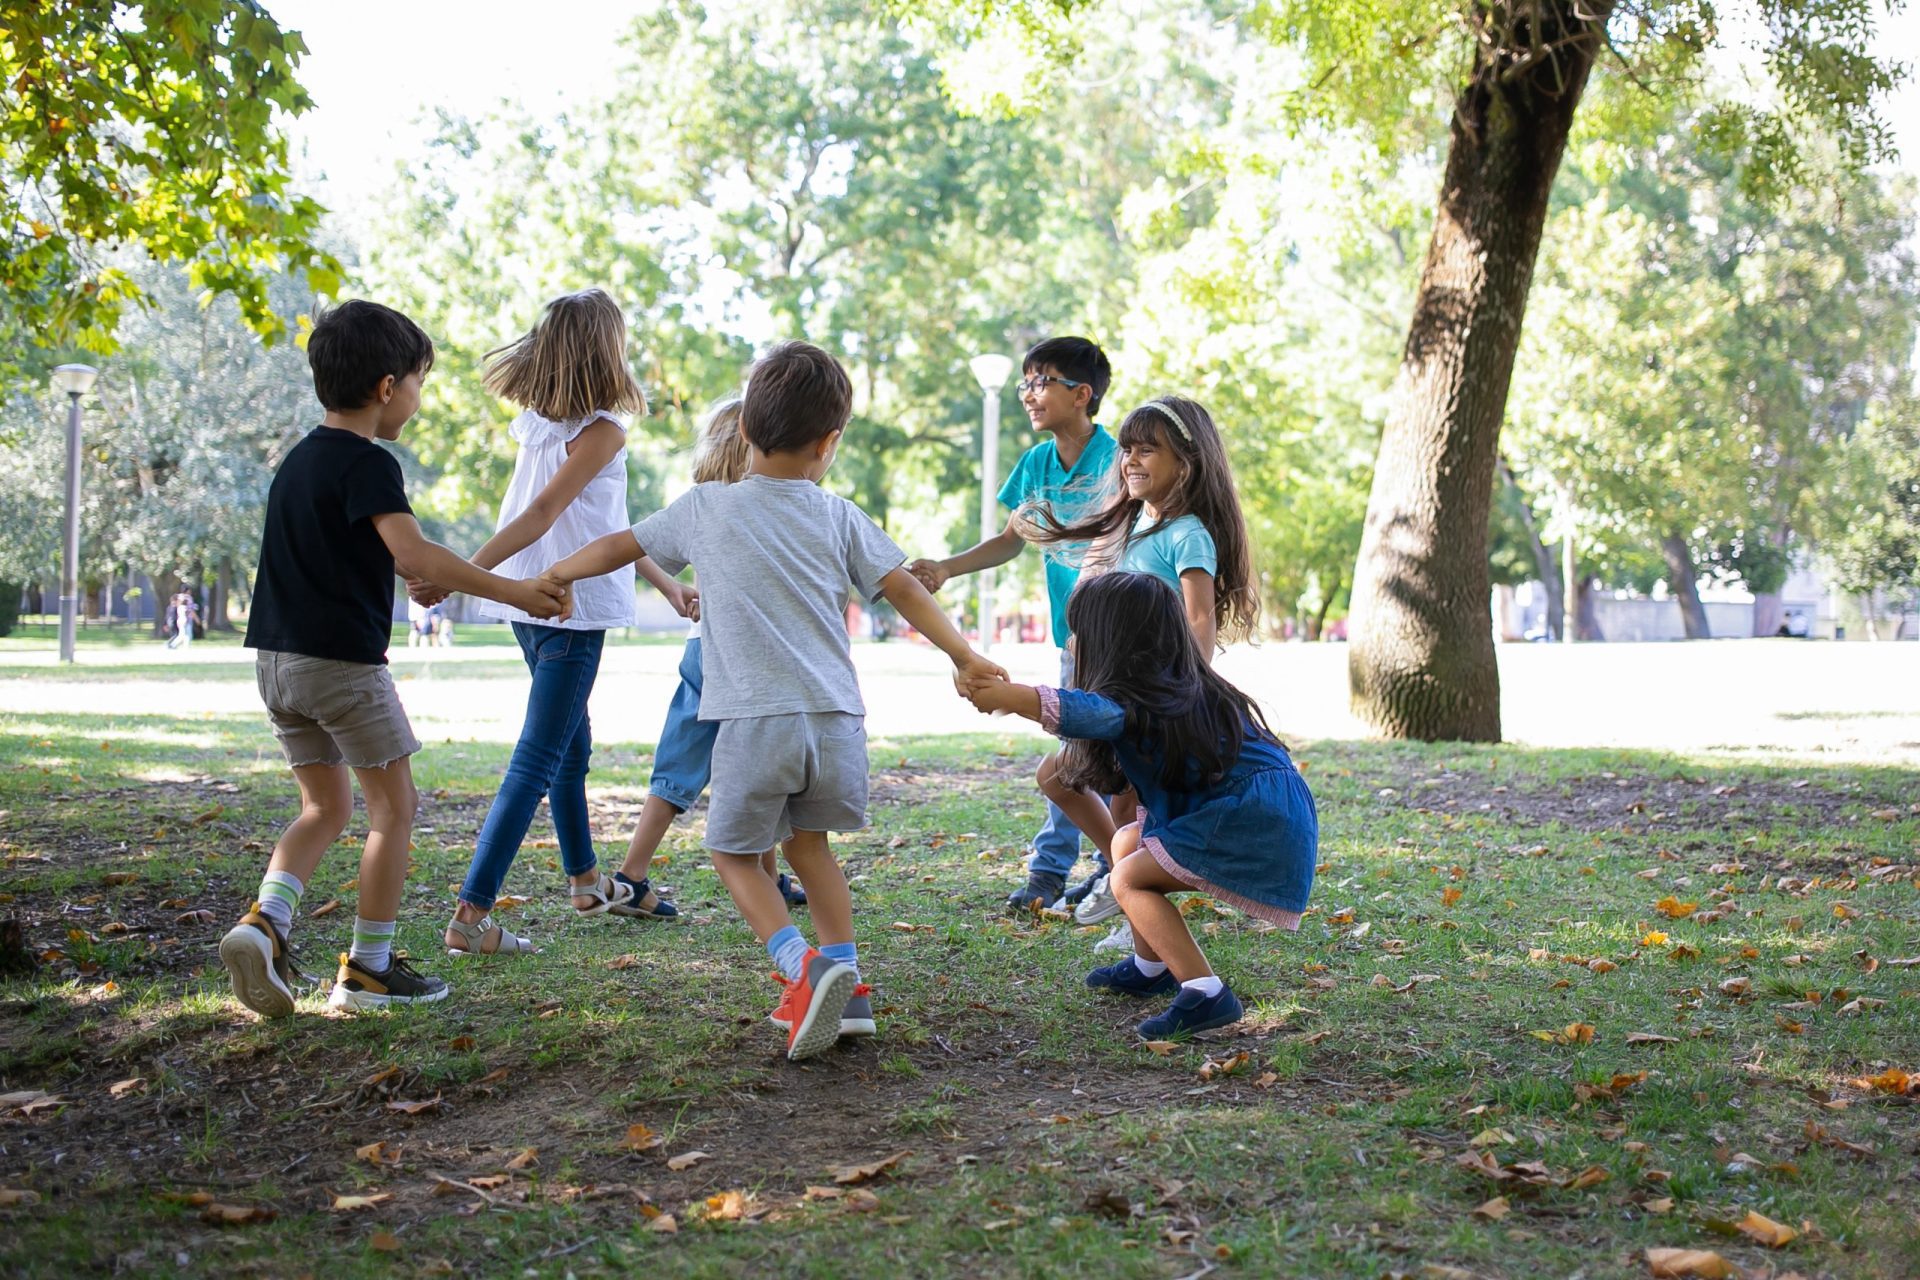 Happy children playing together outdoors, dancing around on grass, enjoying outdoor activities and having fun in park. Kids party or friendship concept